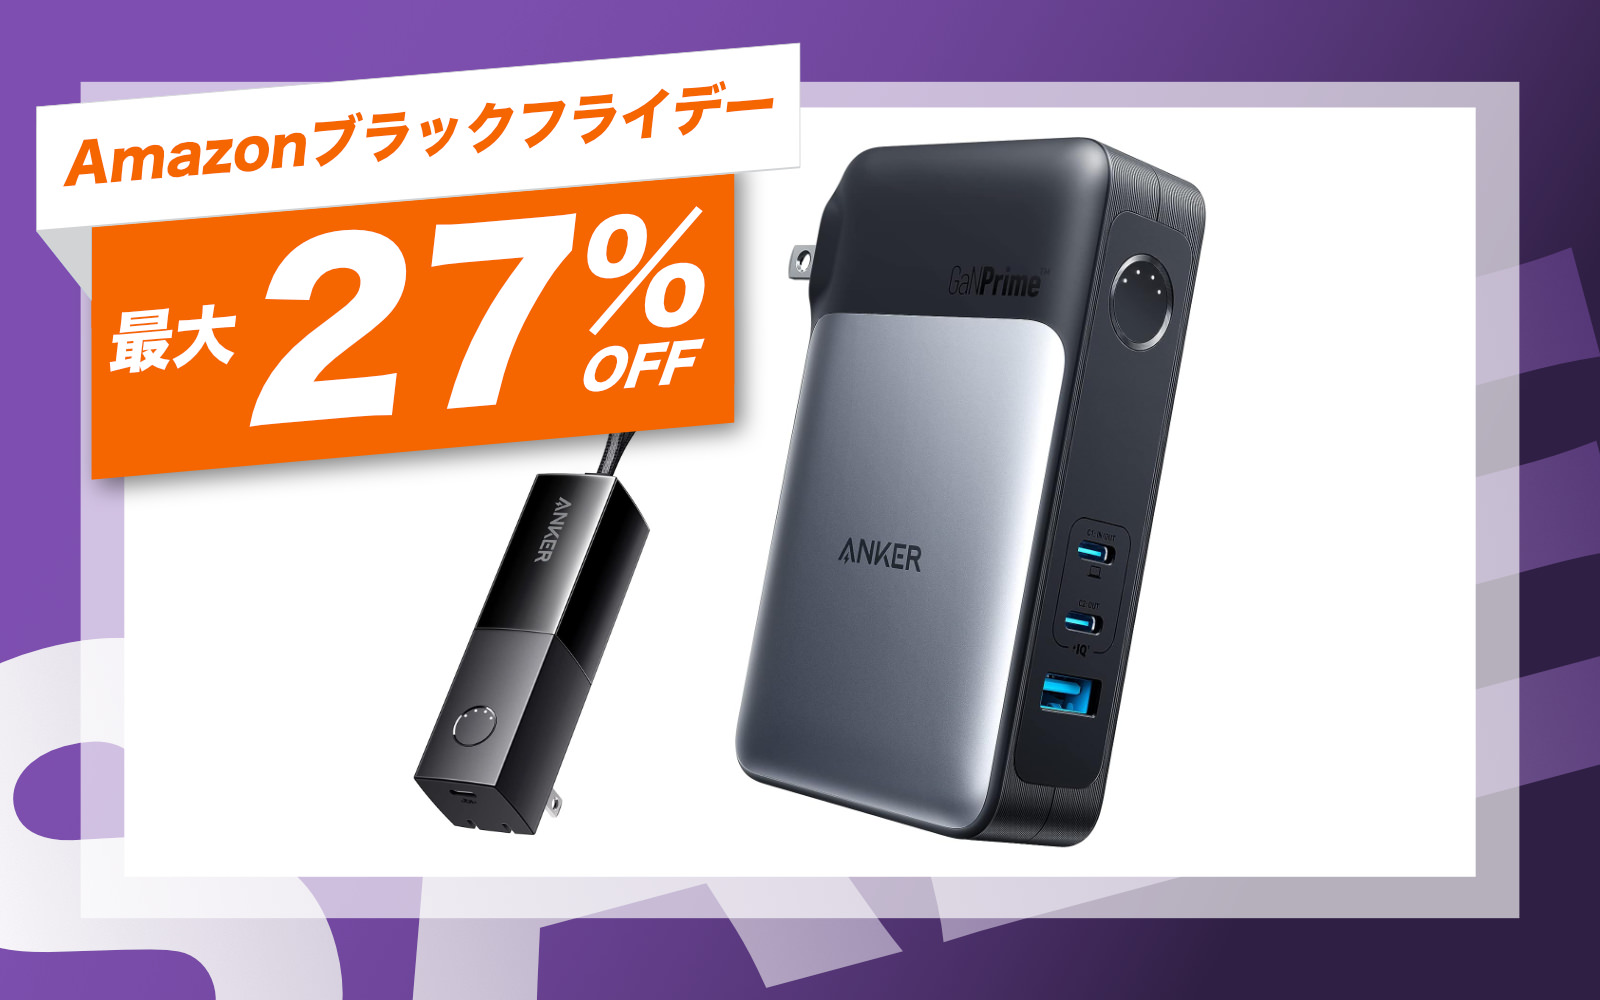 Anker 2 in 1 on sale